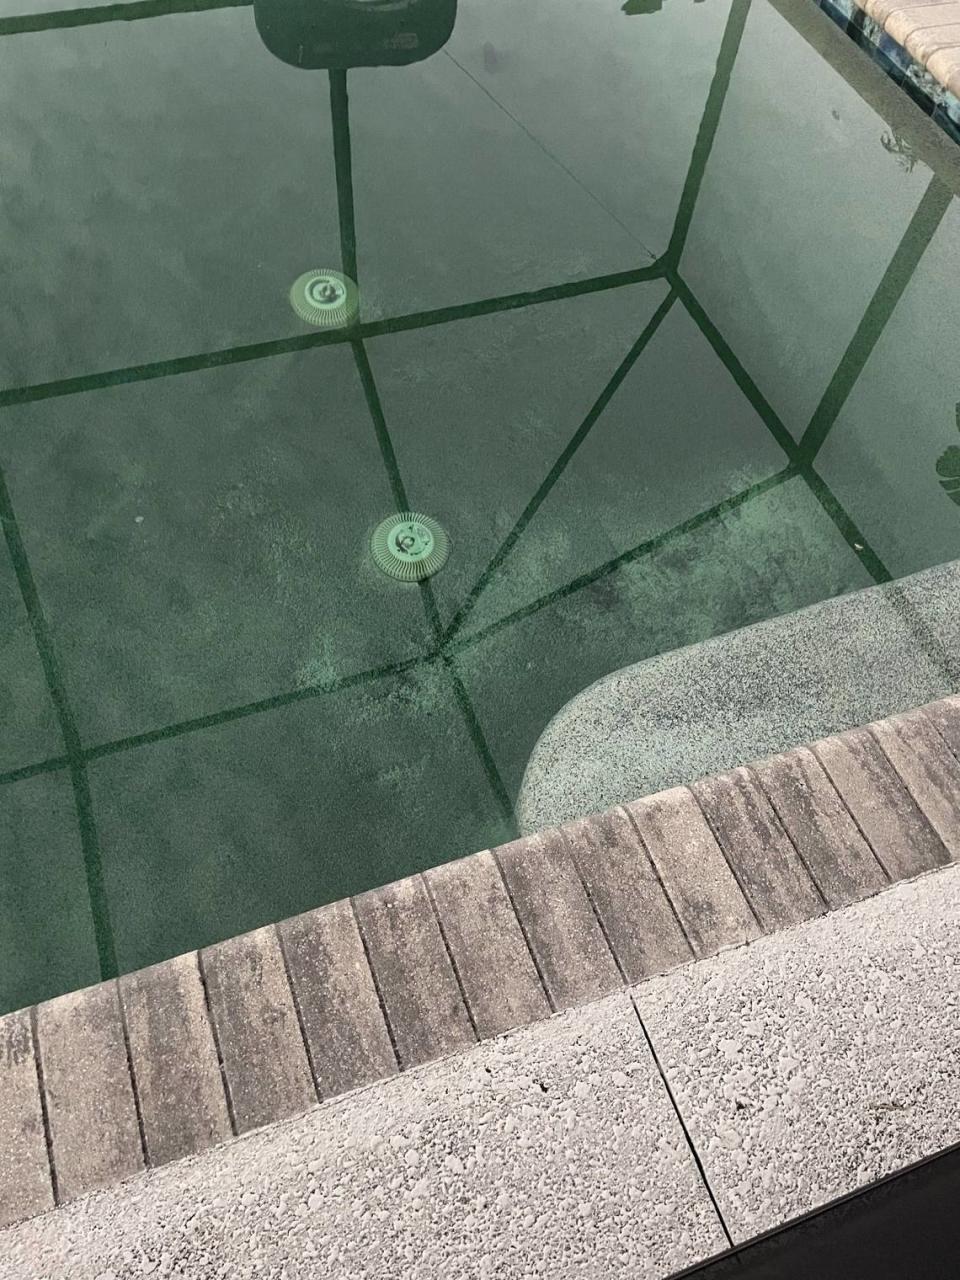 Foxbrook residents said dust from the Rye Ranch construction site is covering their homes. A neighbor shared this photo that shows a layer of dirt at the bottom of their swimming pool.